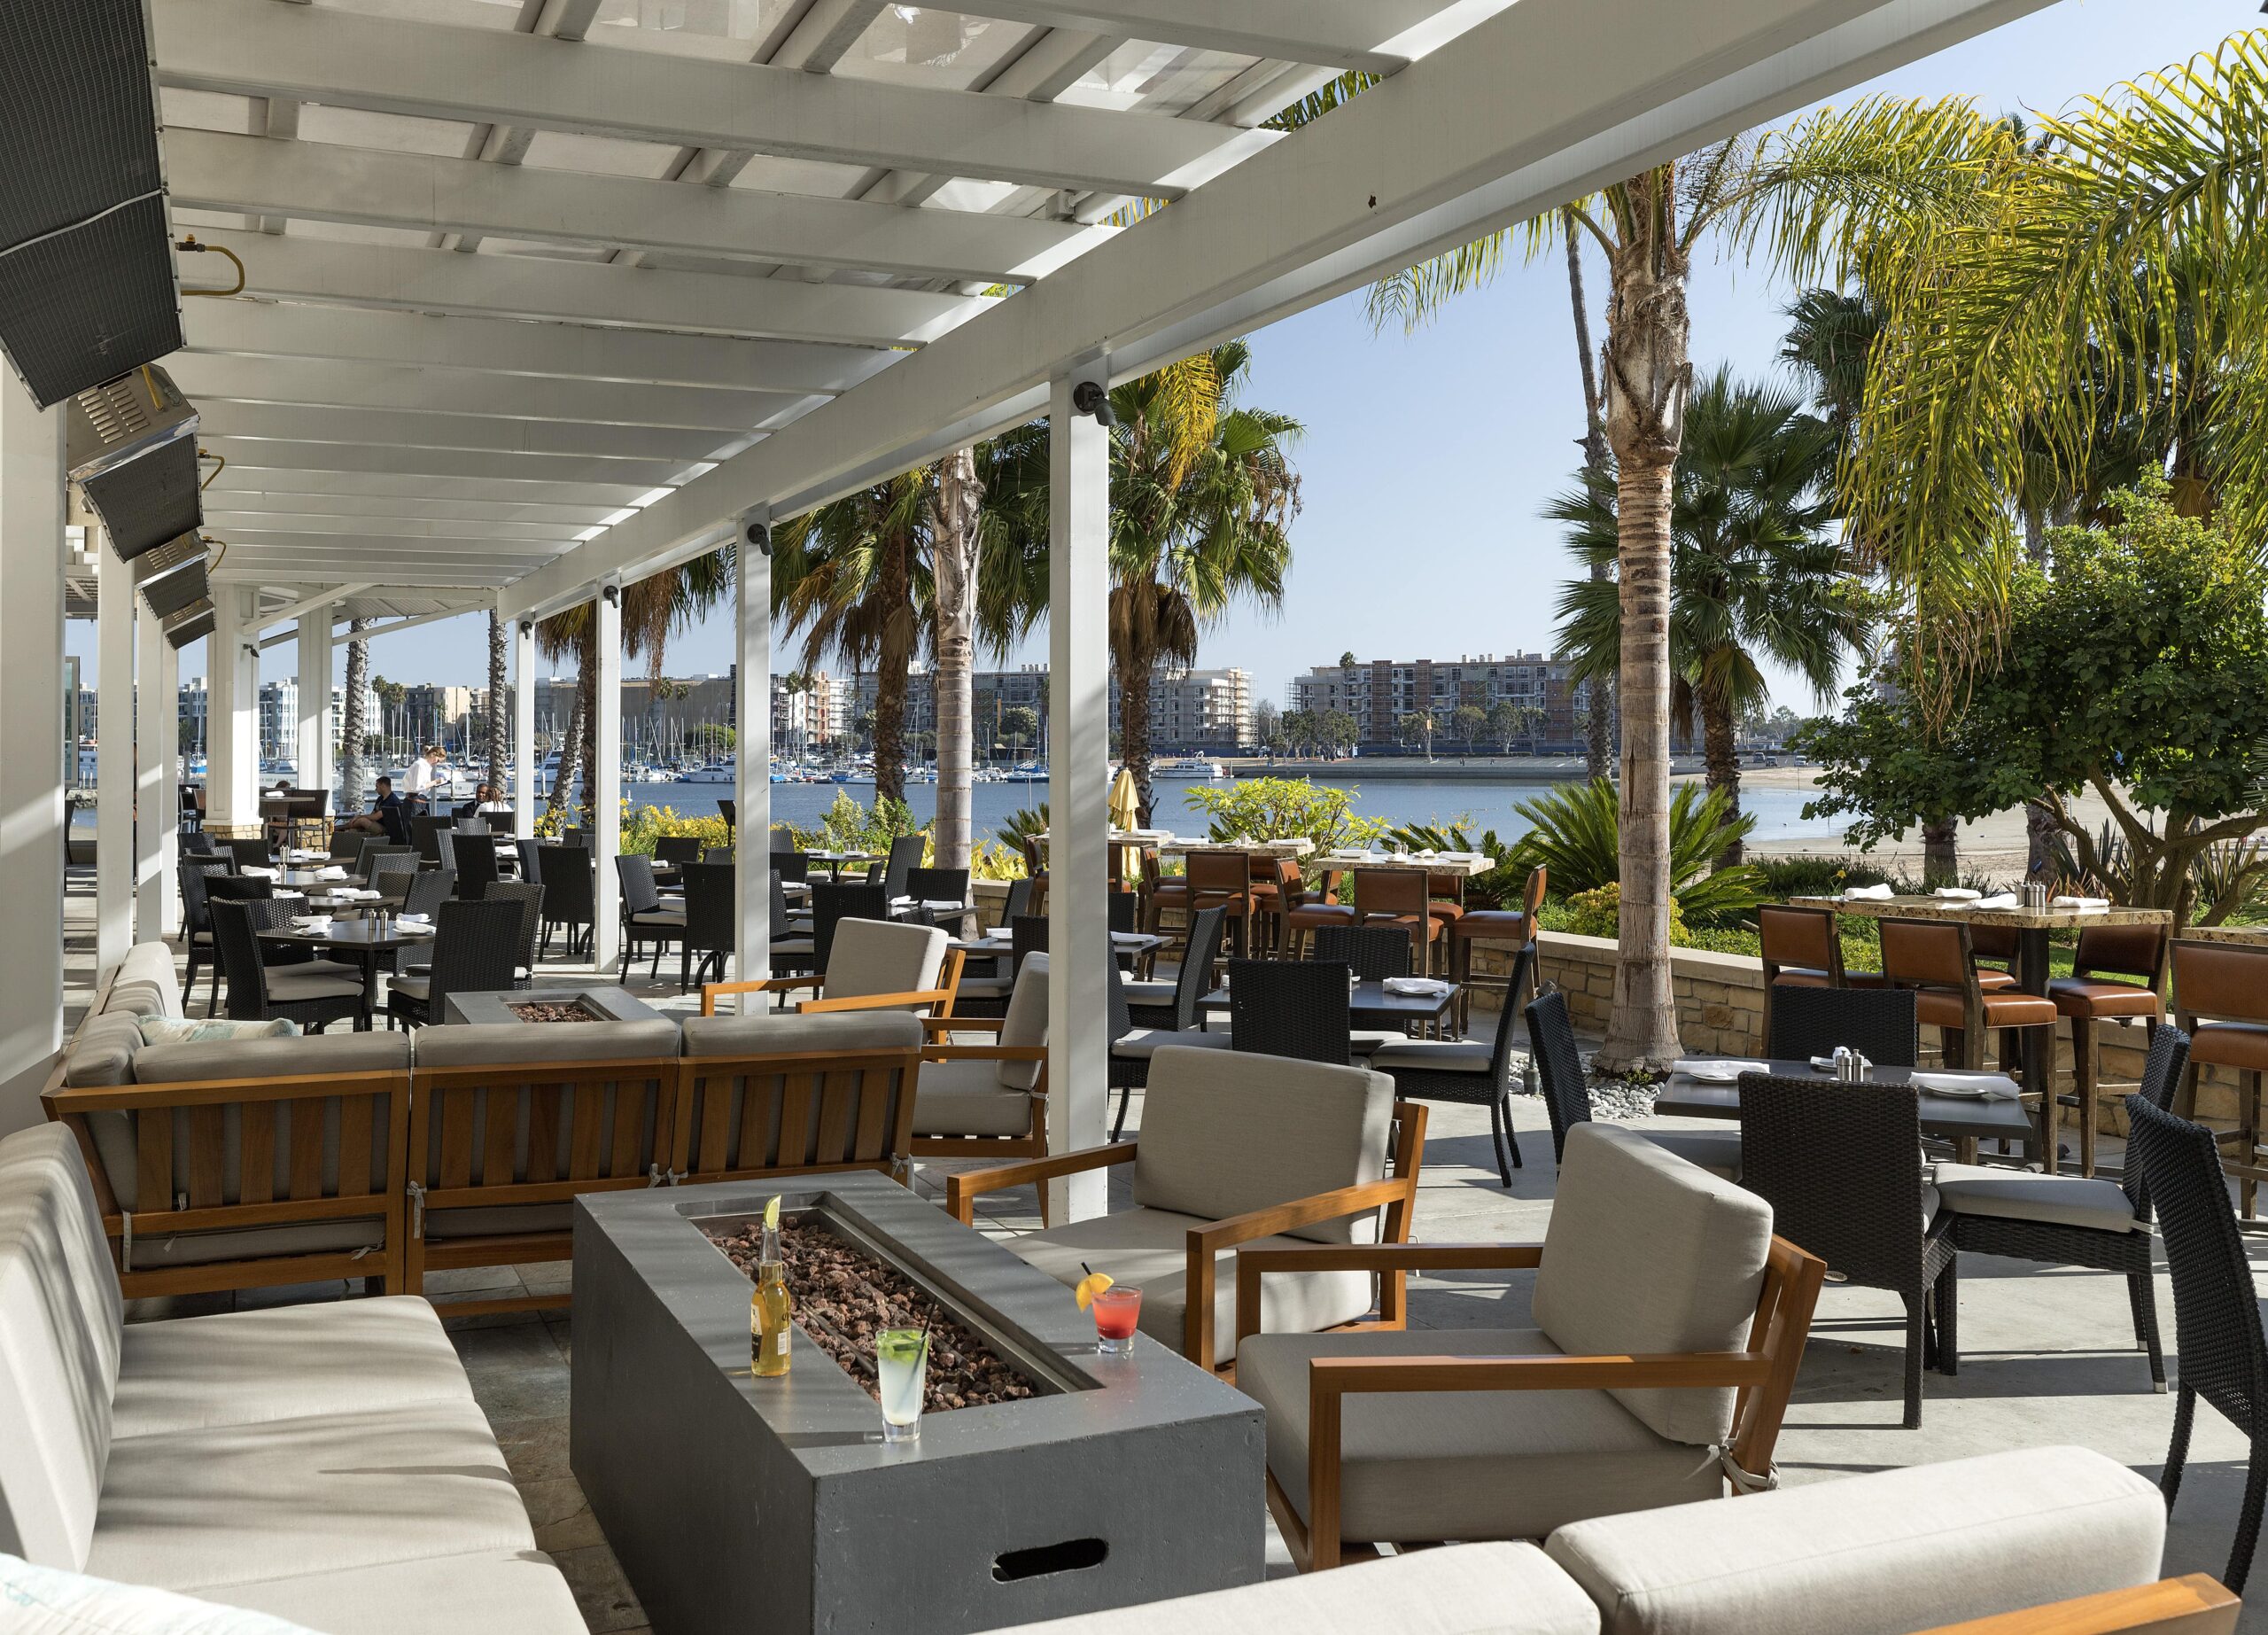 Ring in 2023 by the marina at Jamaica Bay Inn's Beachside Restaurant & Bar! Enjoy a special New Year’s Eve menu with one of the best fireworks shows in the harbor. The hotel patio is the perfect spot to watch and celebrate with a champagne toast.